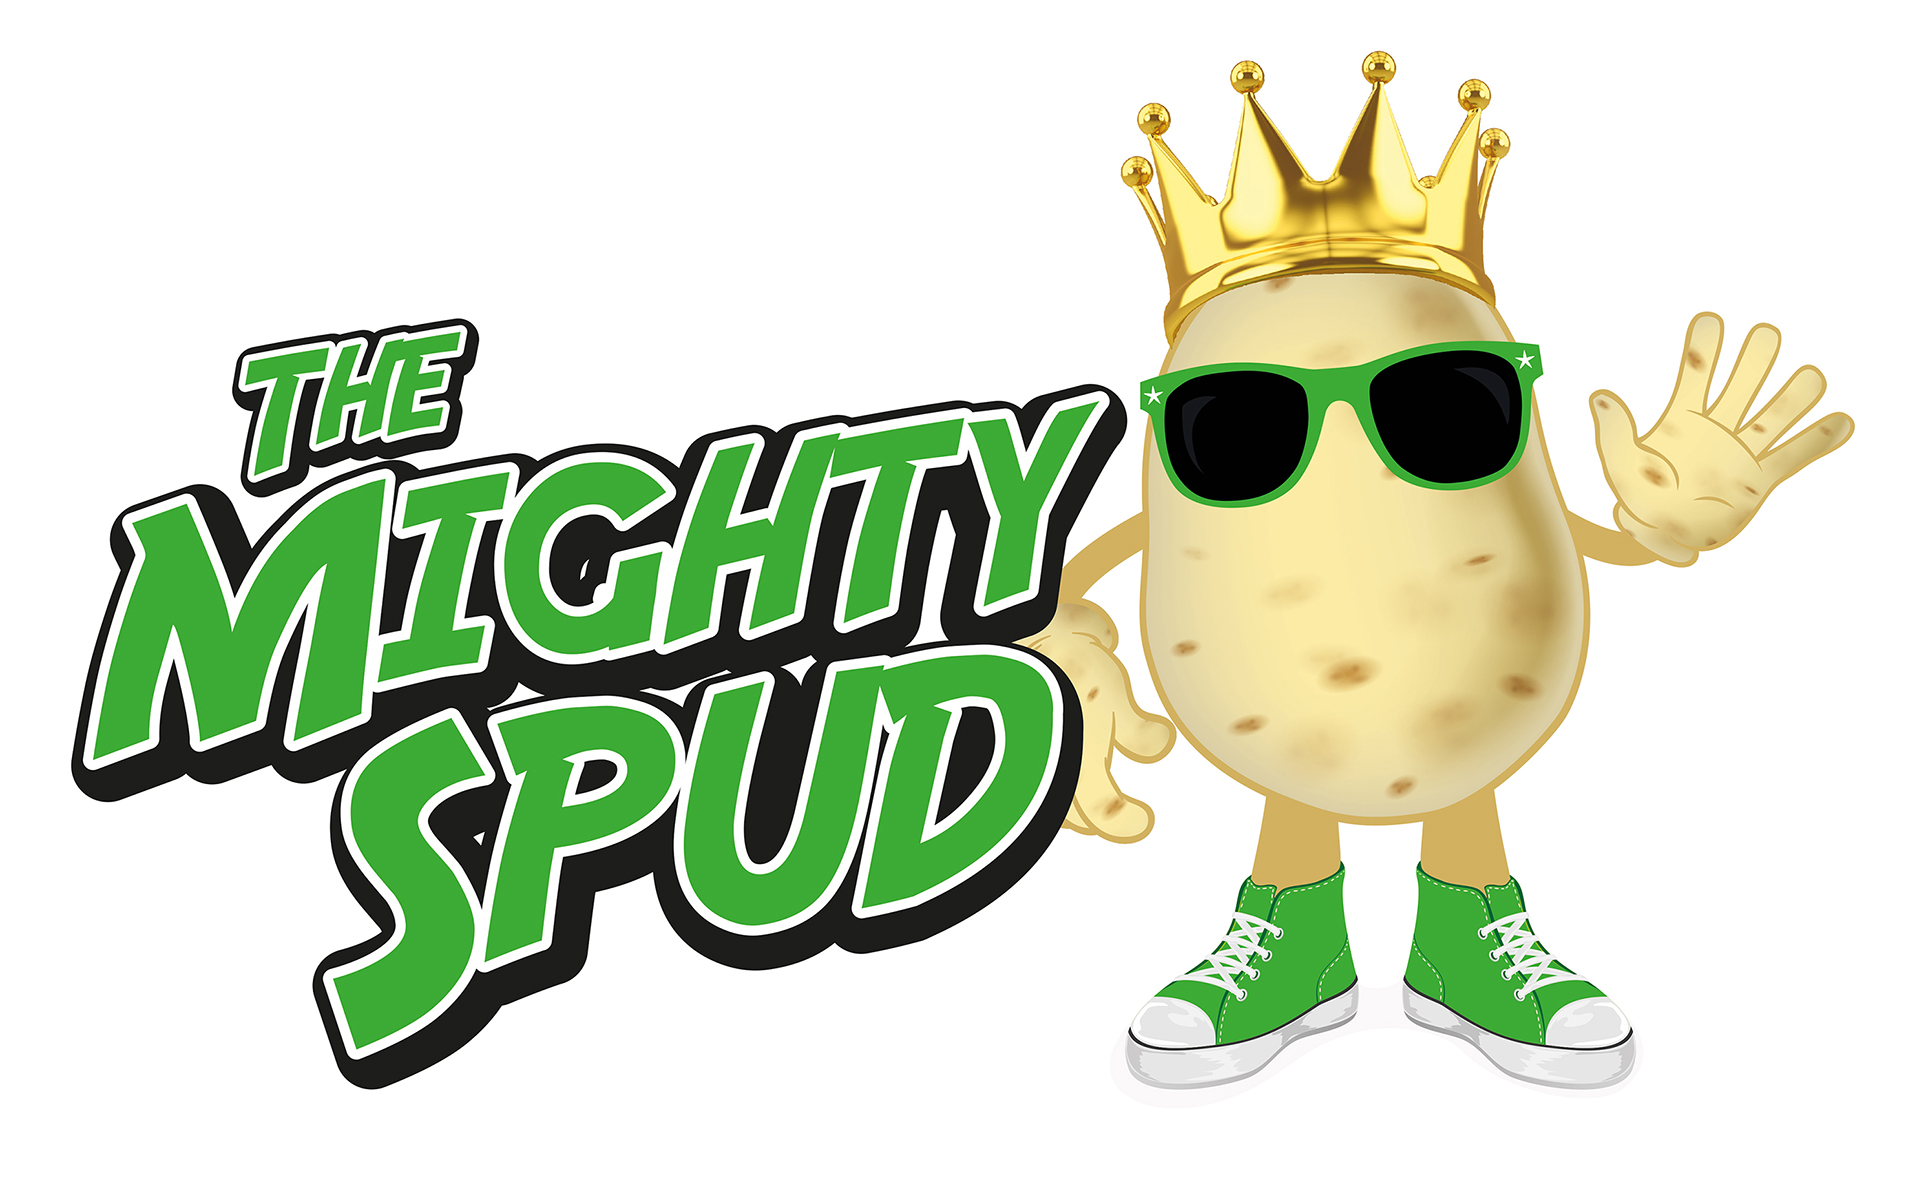 The Mighty Spud